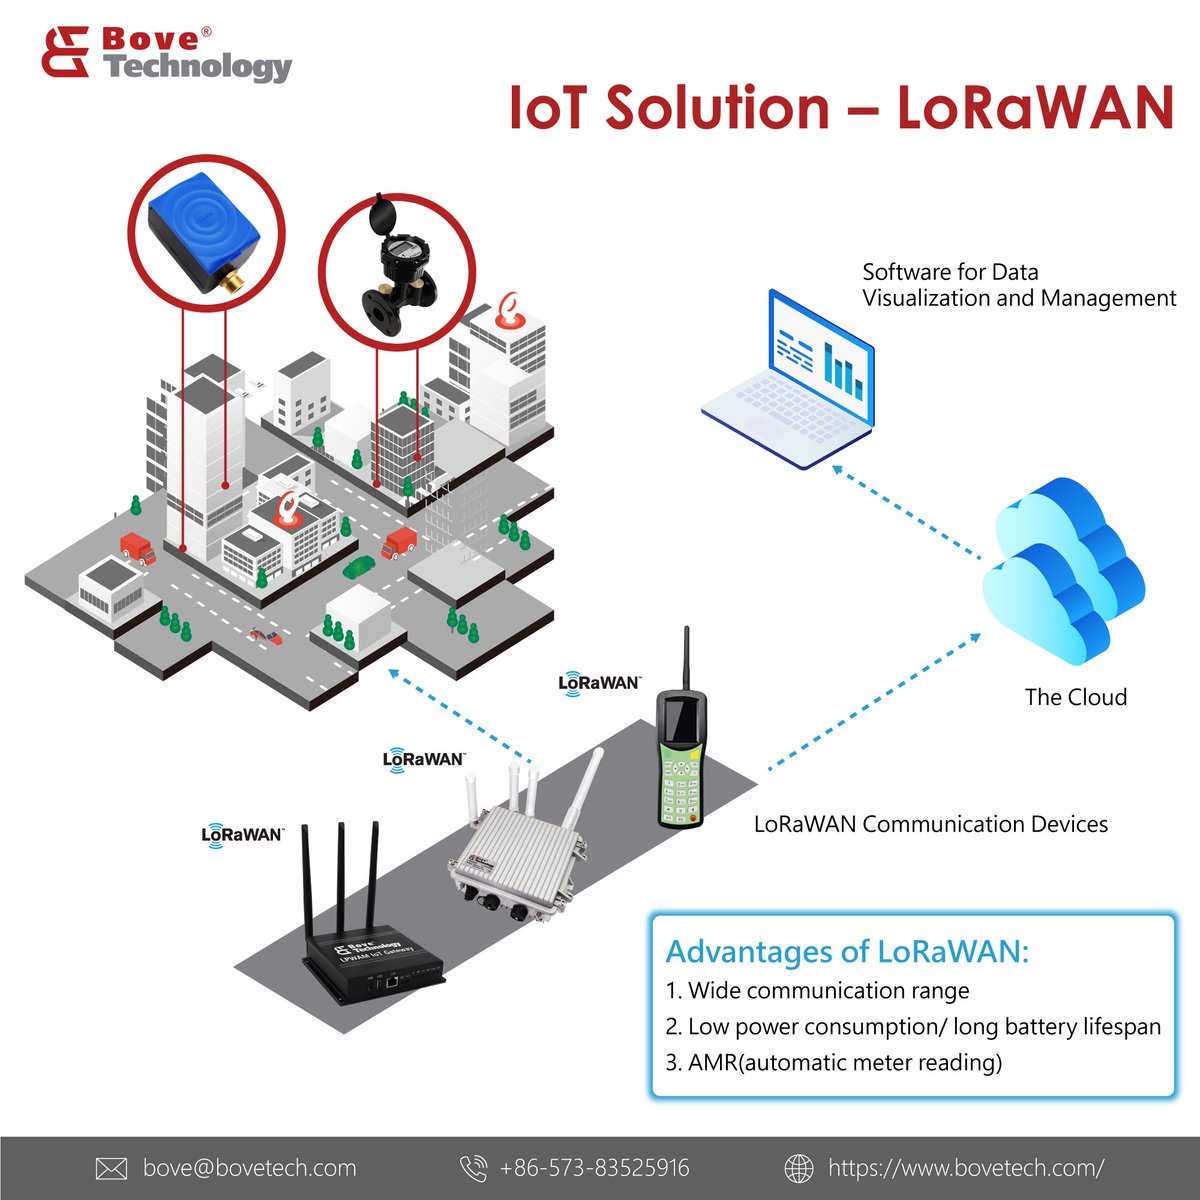 Looking for a low-power, long-range #wireless solution for your water consumption? Look no further than Bove’s IoT solution of LoRaWAN ! #LoraWAN’s wide communication range capacities make it the ideal choice for #waterconsumption tracking and monitoring💧